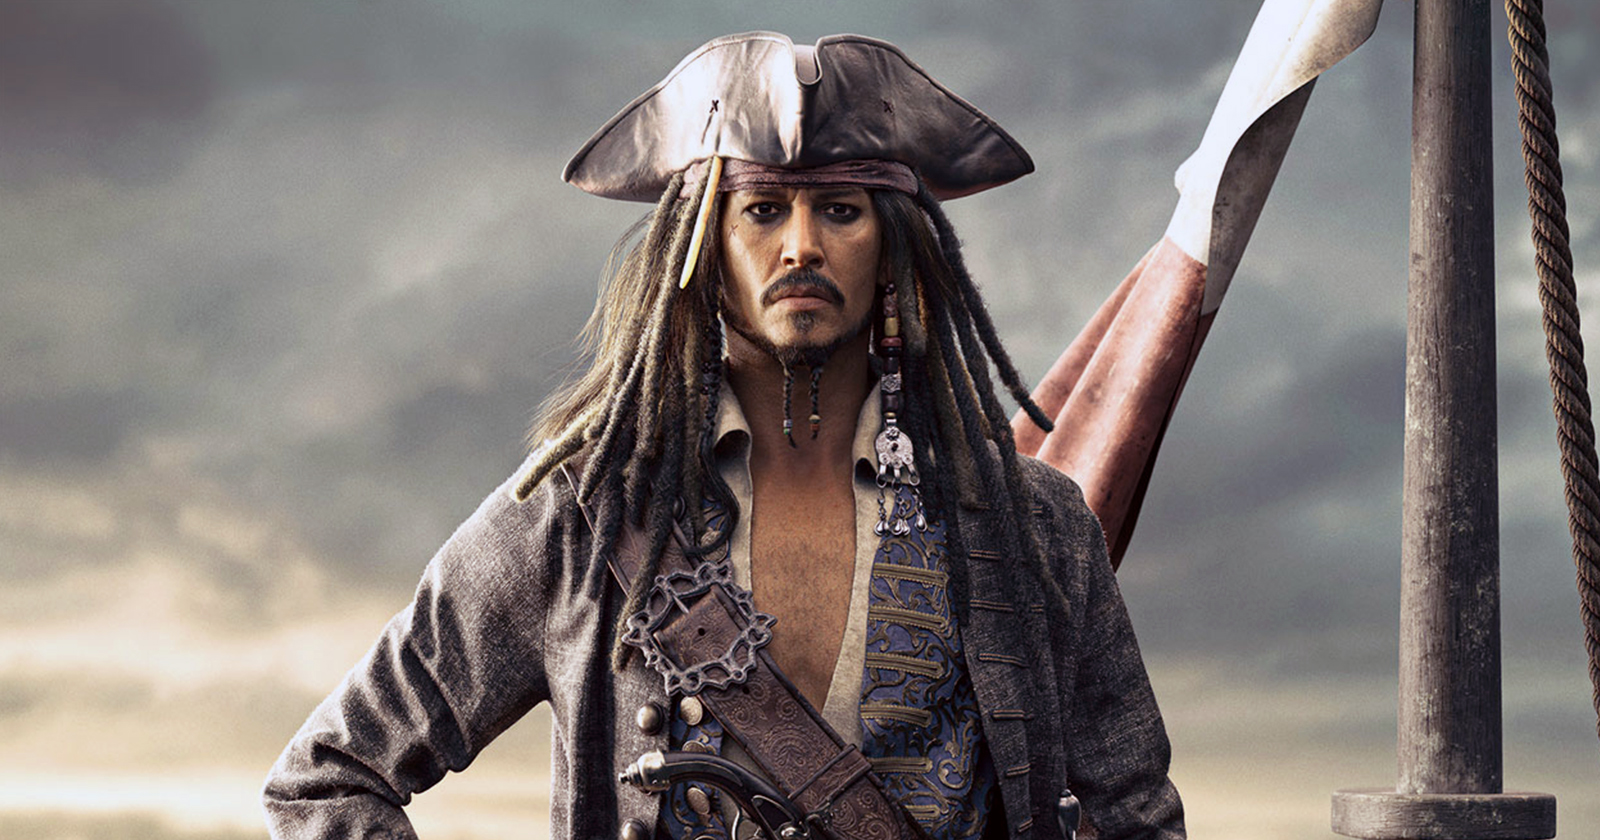 The new Pirates of the Caribbean movie is coming! But it’s not what you think…